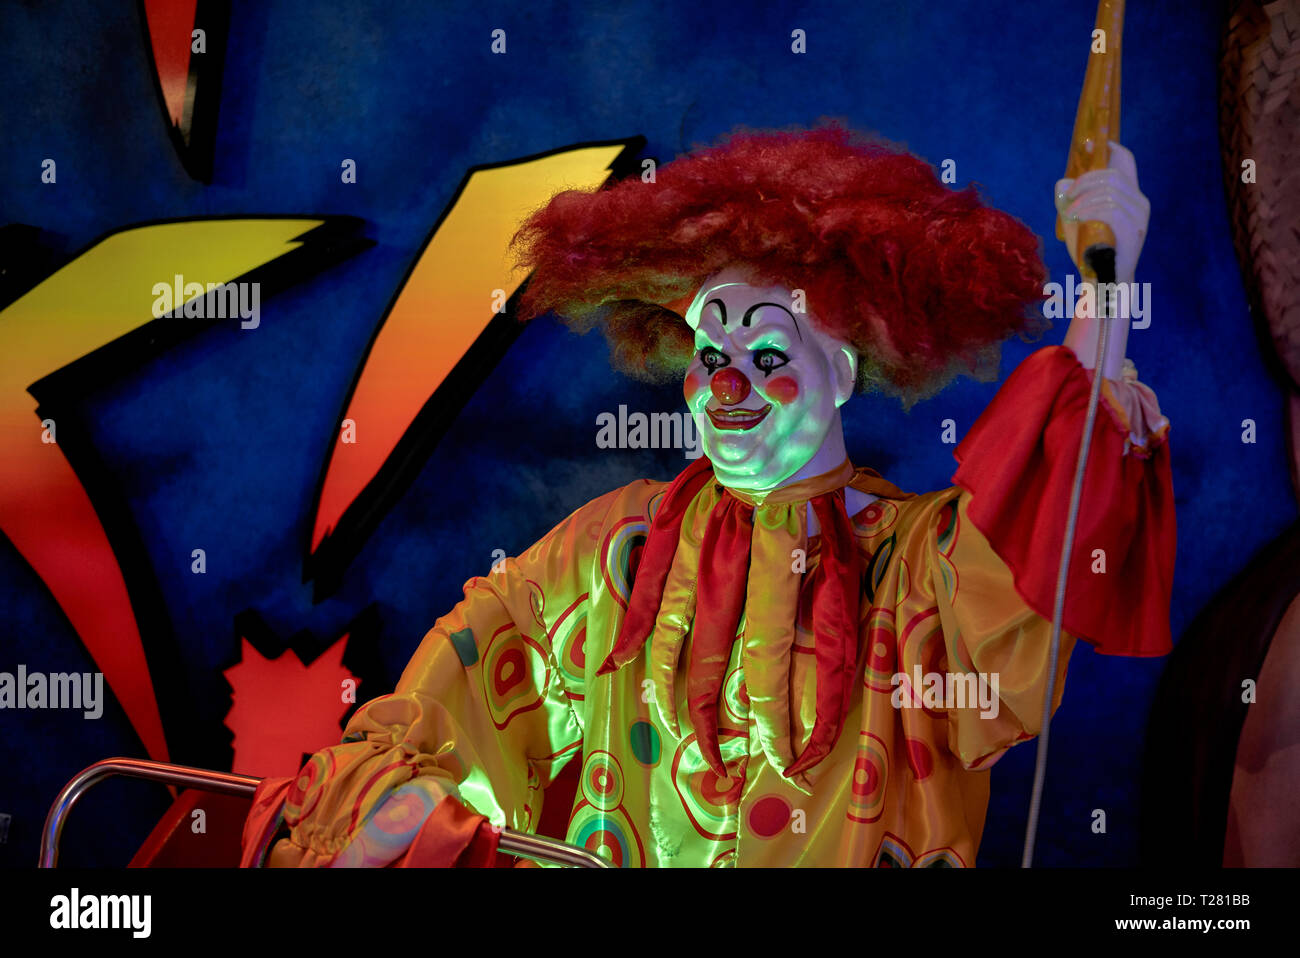 Scary clown figure at a horror show venue. Ripley's Believe it or Not Pattaya Thailand. (BHZ) Stock Photo